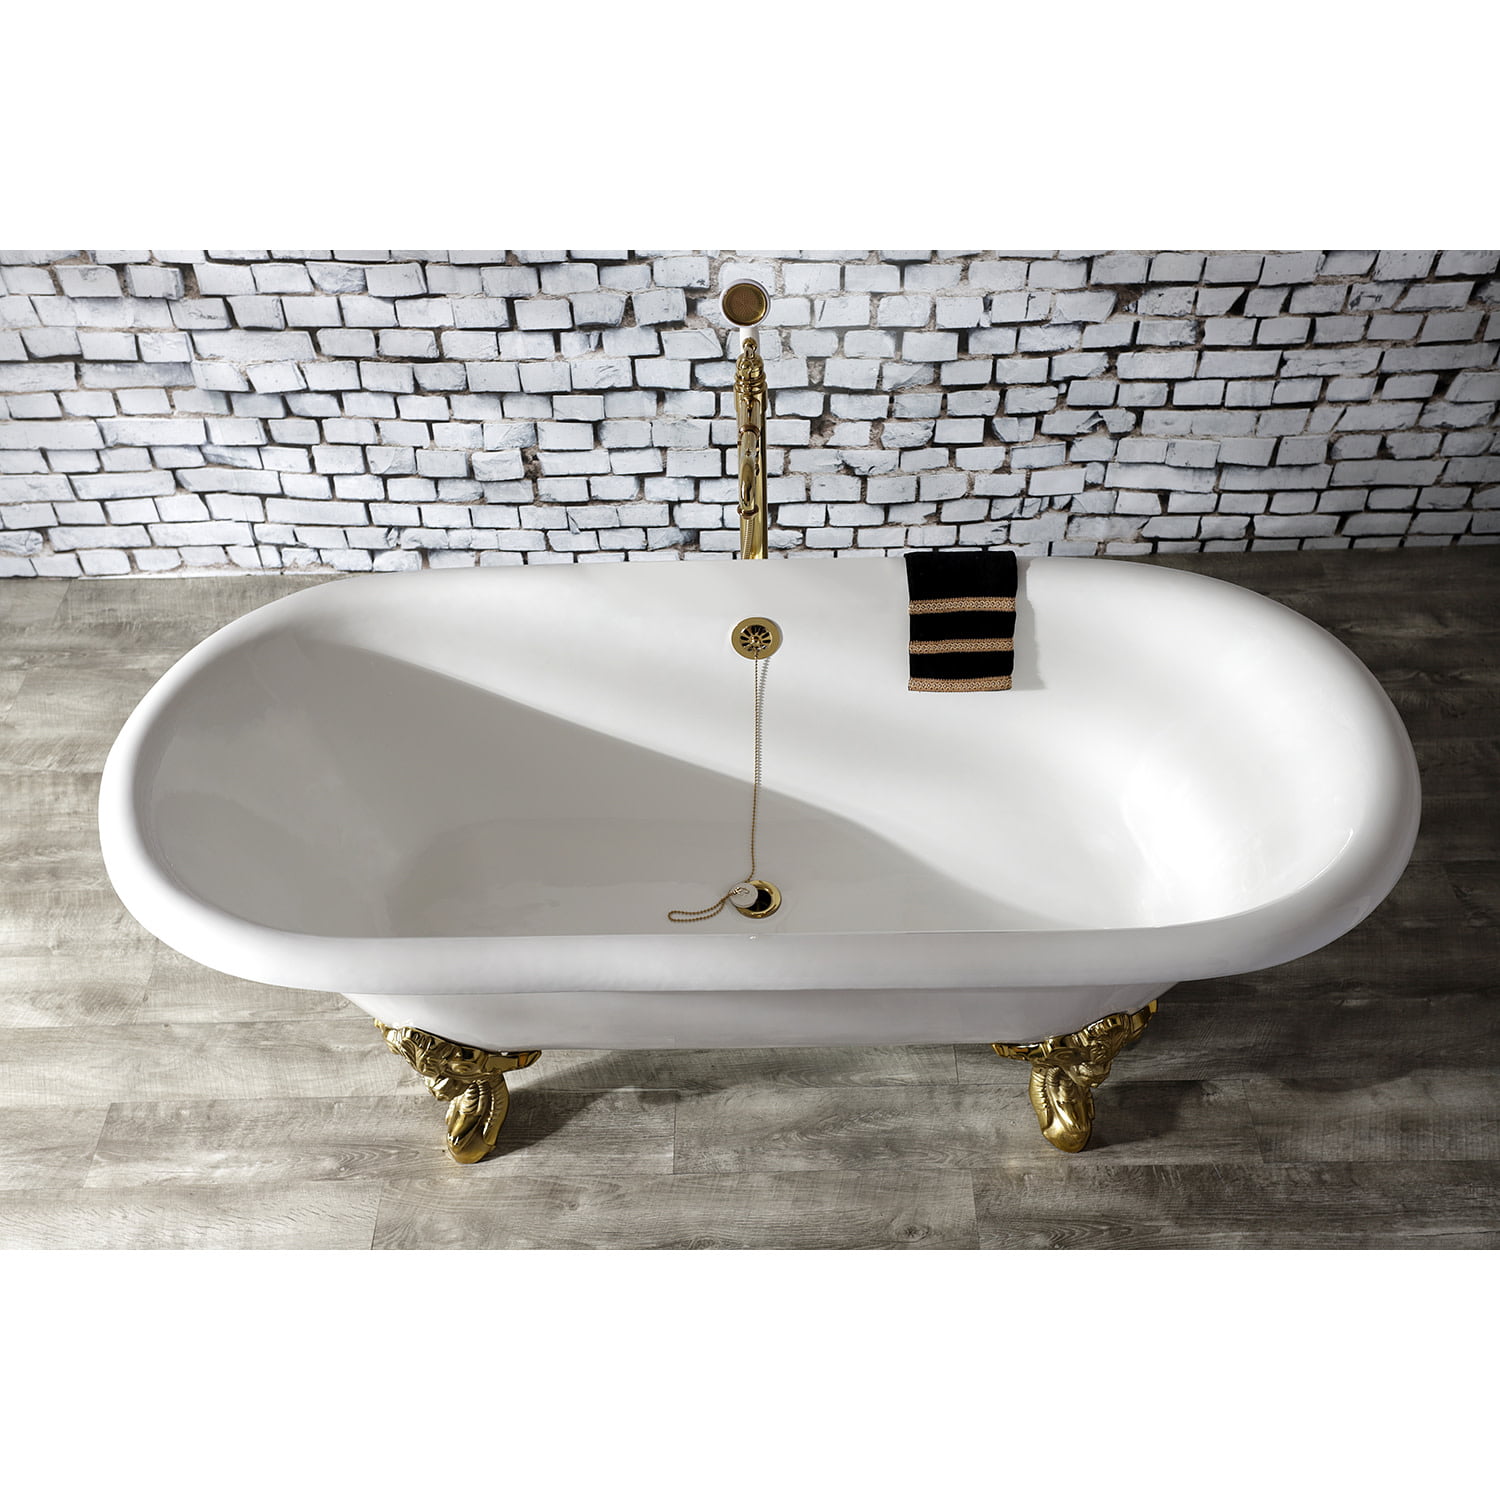 Lord of Leisure Bathtub Overflow Drain Cover and Tub Drain Stopper – Madam  of Leisure & Lord of Leisure